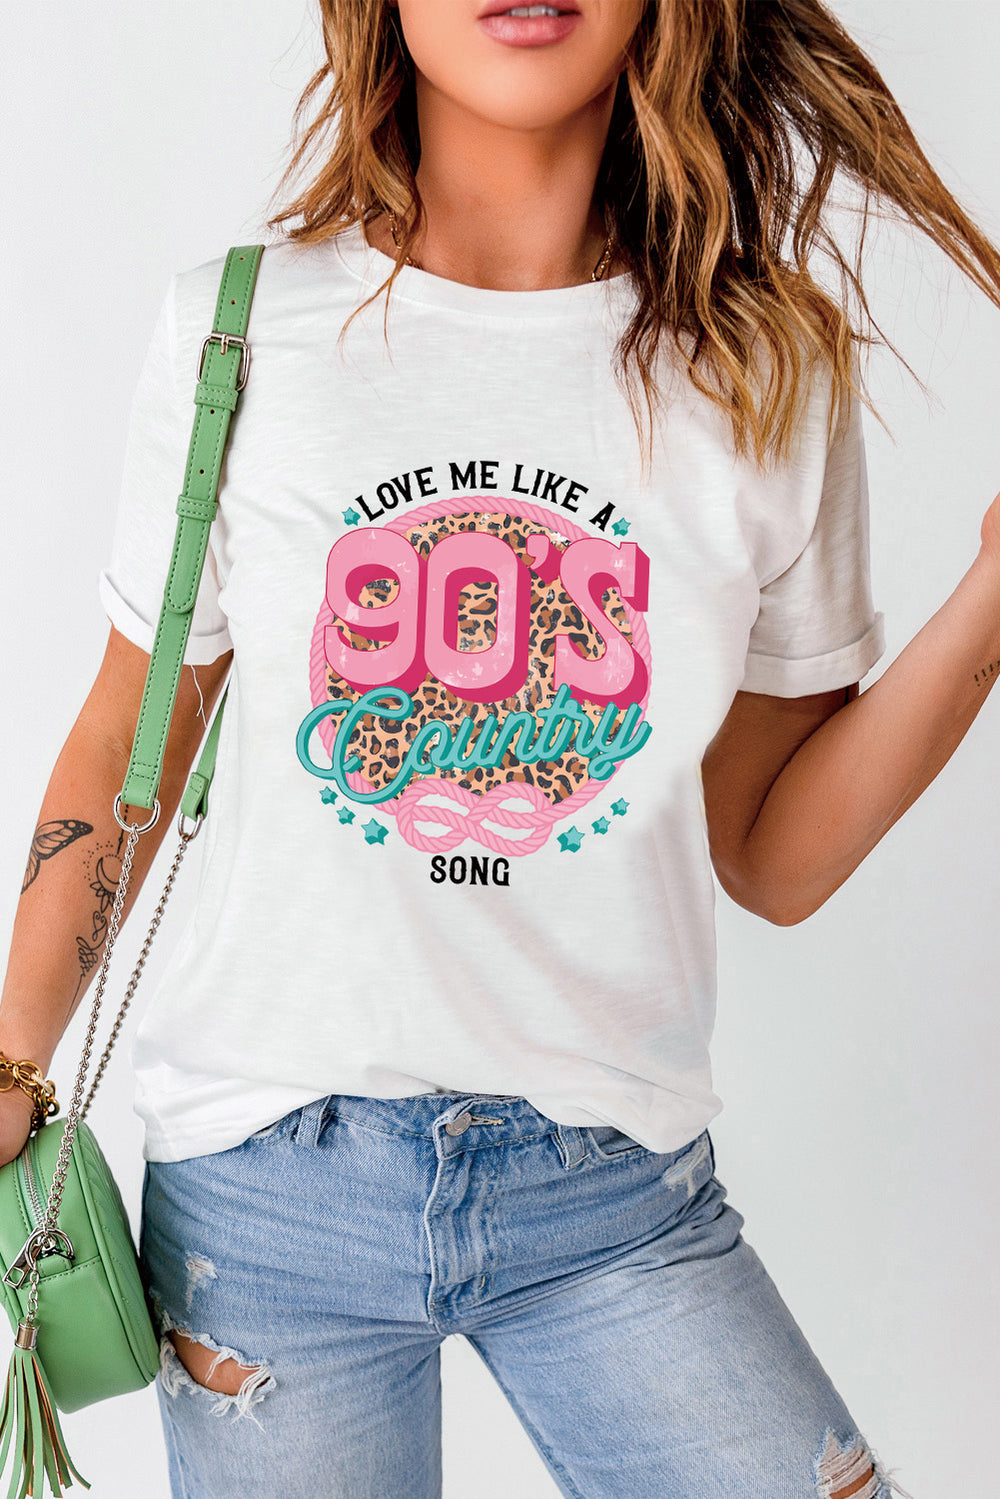 "LOVE ME LIKE A 90’S COUNTRY SONG" White Graphic Tee